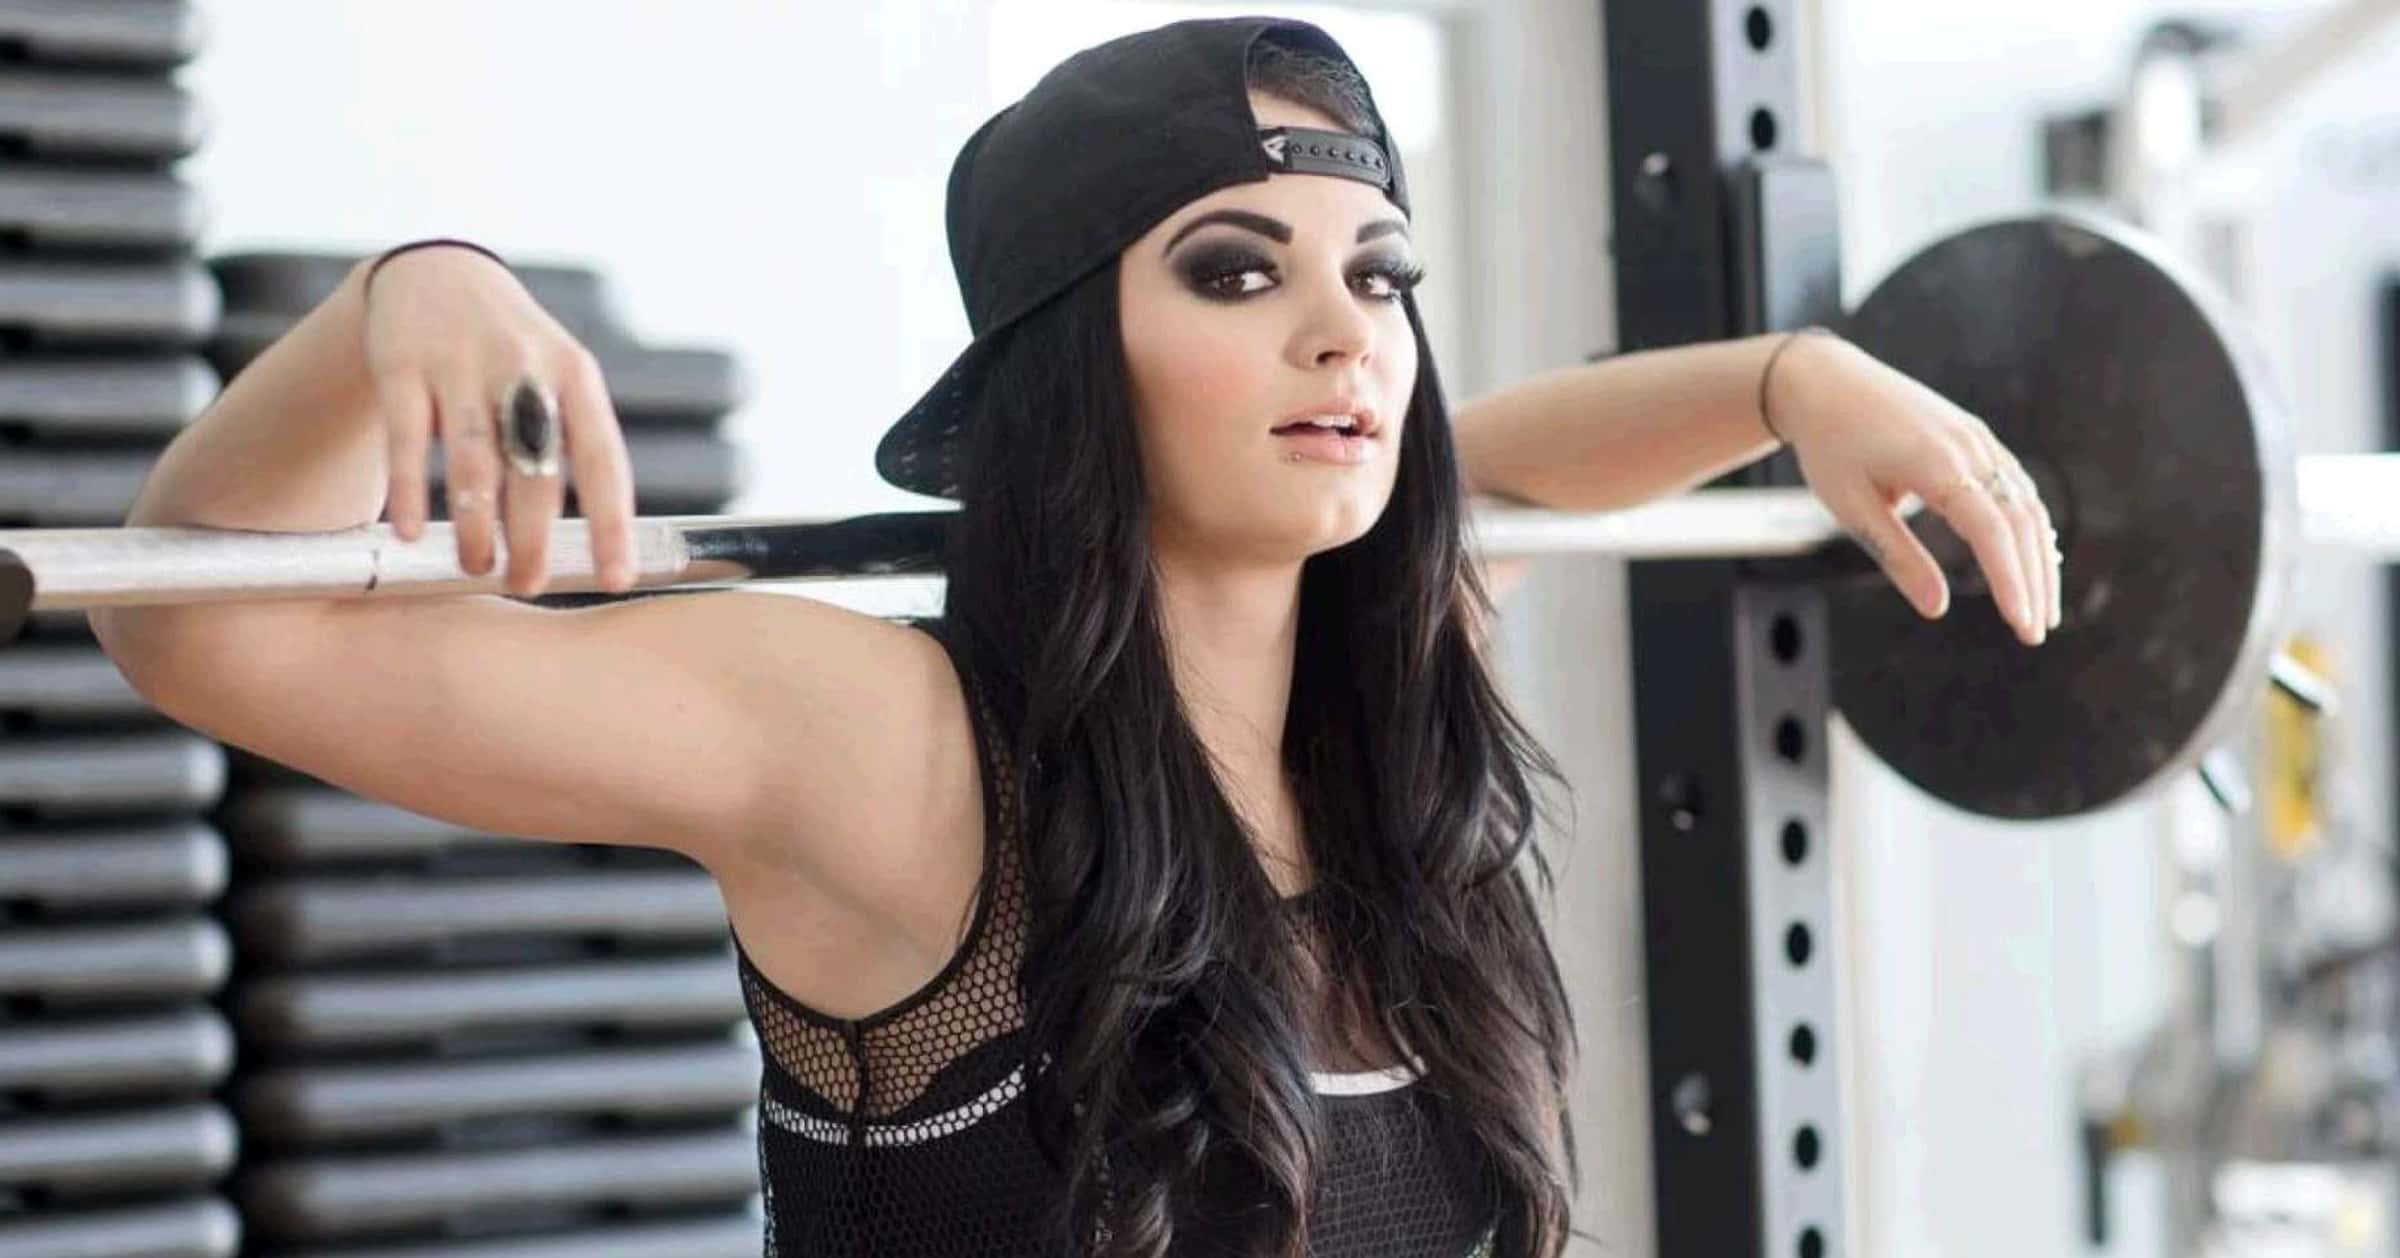 Wwe Porn Paige Hairy Pussy - Famous Female Wrestlers | List of Top Female Wrestlers